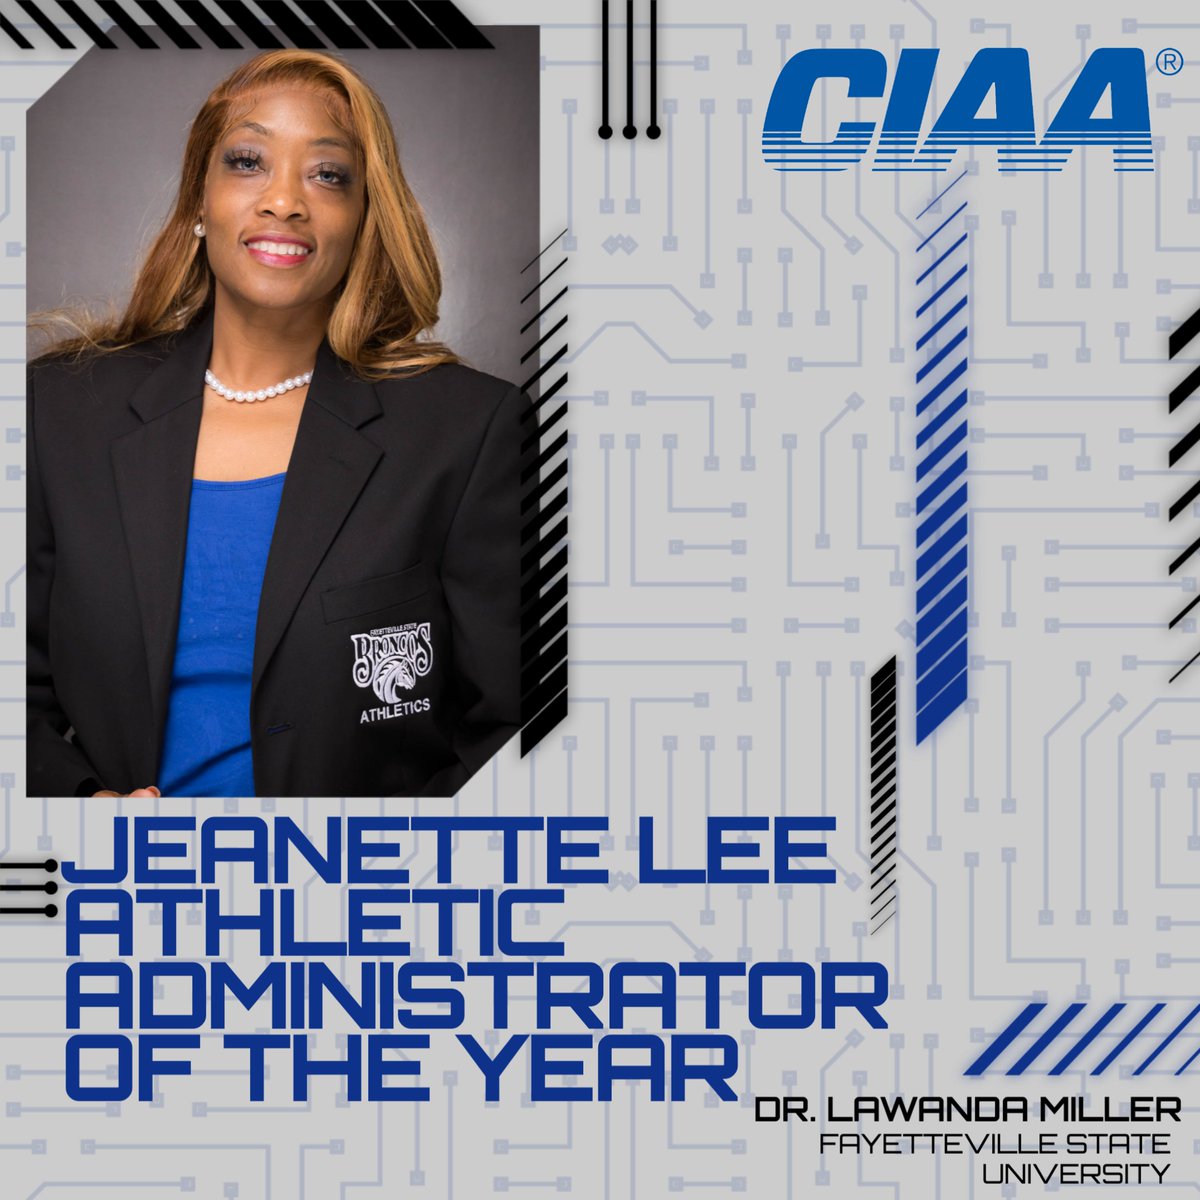 Fayetteville State University's Dr. Lawanda Miller received the Central Intercollegiate Athletic Association (CIAA) Jeanette Lee Athletic Administrator of the Year award at the CIAA Spring General Assembly meeting and end-of-the-year awards reception in Richmond, Va.